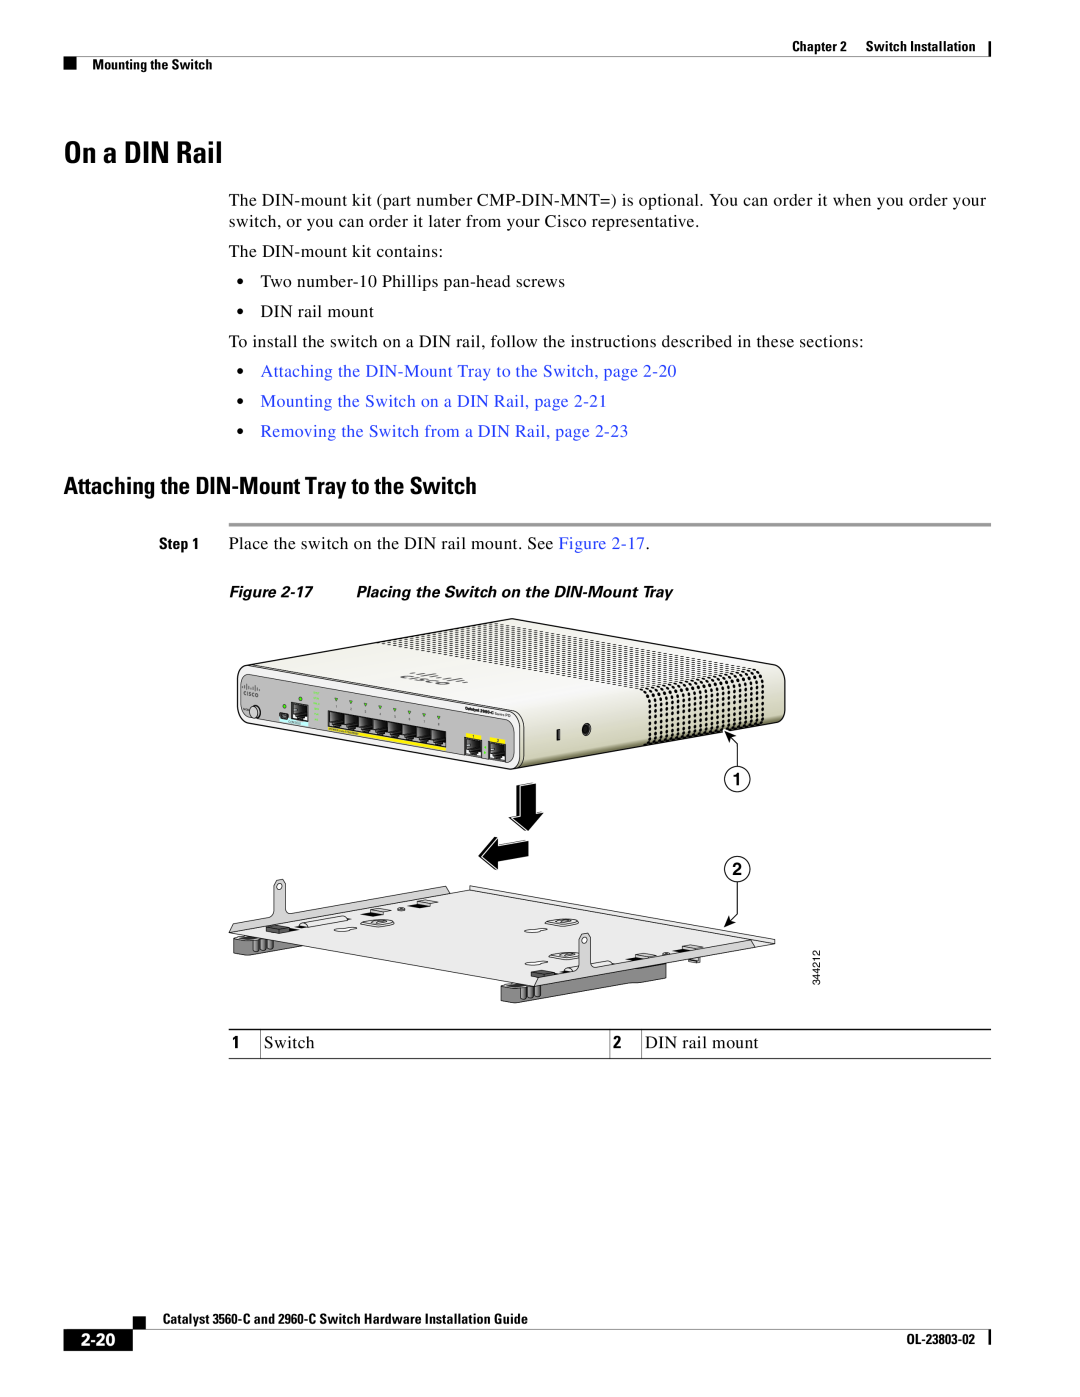 Cisco Systems N55M4Q On a DIN Rail, Attaching the DIN-Mount Tray to the Switch, Mounting the Switch on a DIN Rail, page 